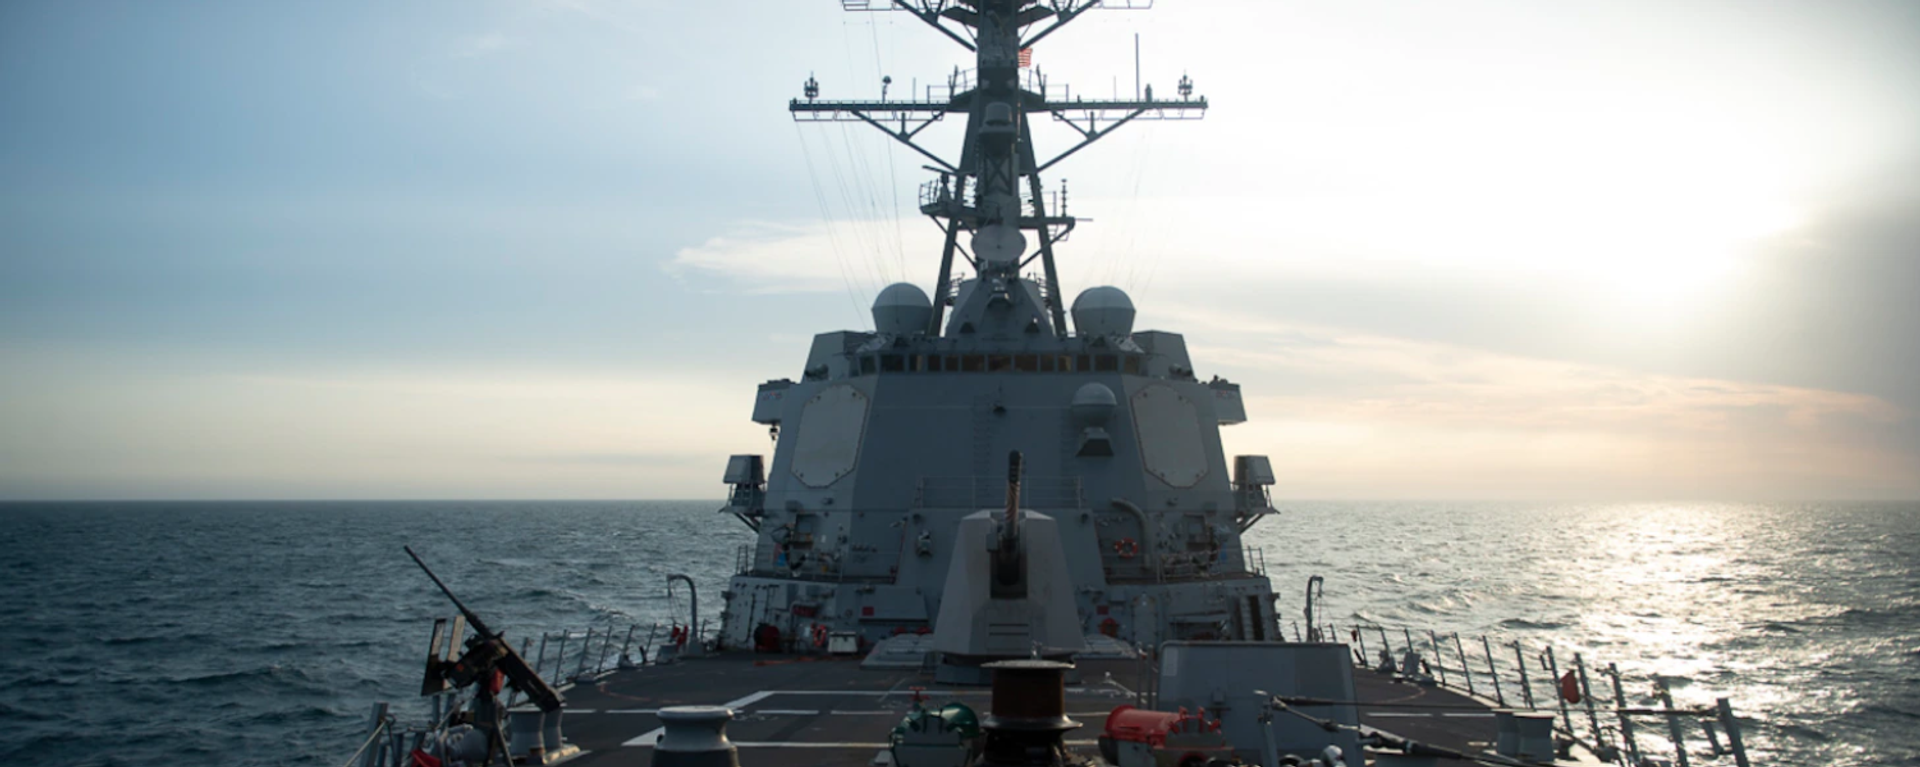 The Arleigh Burke-class guided-missile destroyer USS Sampson (DDG 102) conducted a routine Taiwan Strait transit April 26, 2022. - Sputnik International, 1920, 23.03.2023